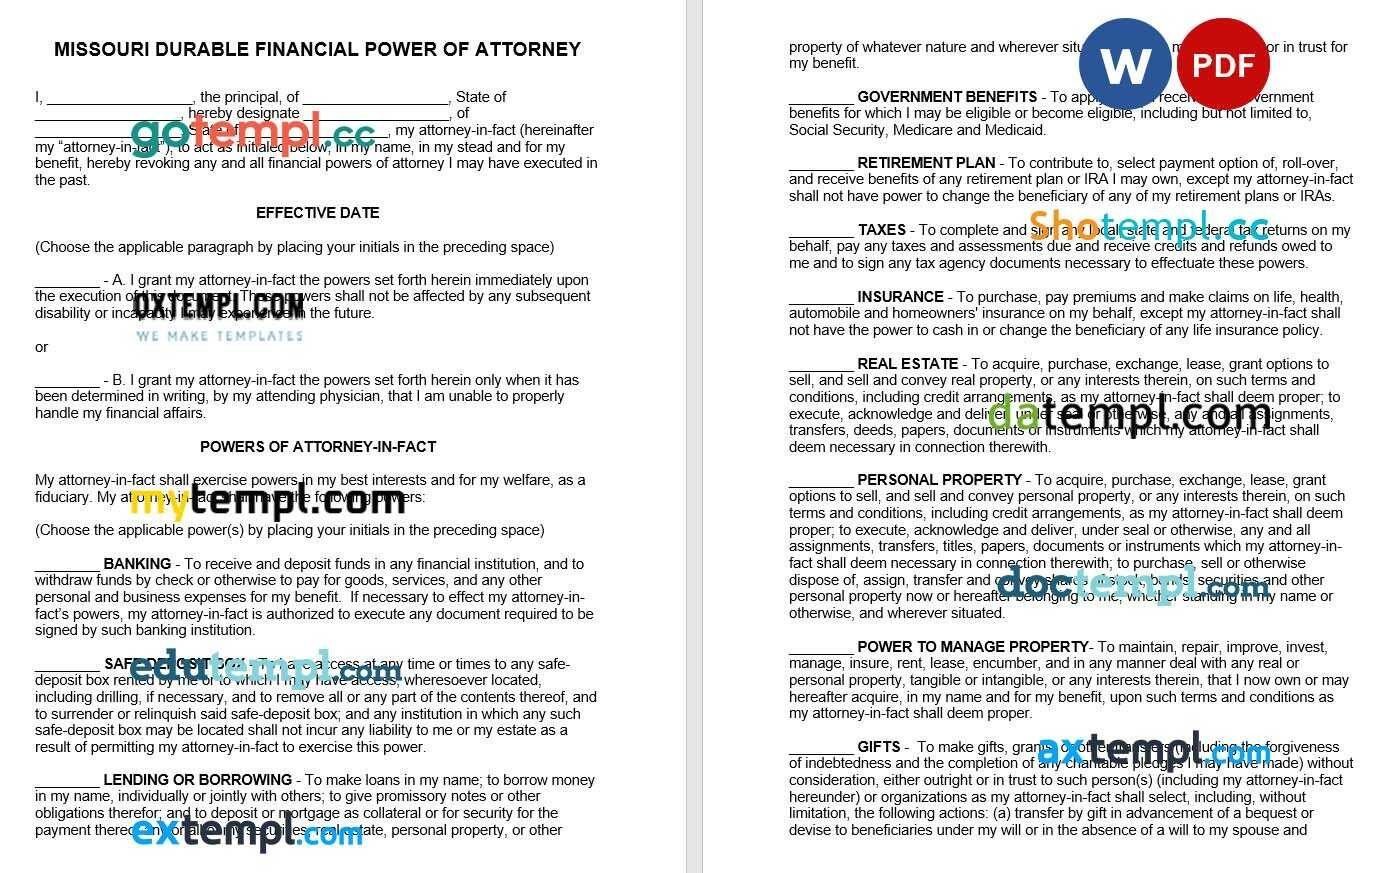 Missouri Durable Financial Power of Attorney Form example, fully editable